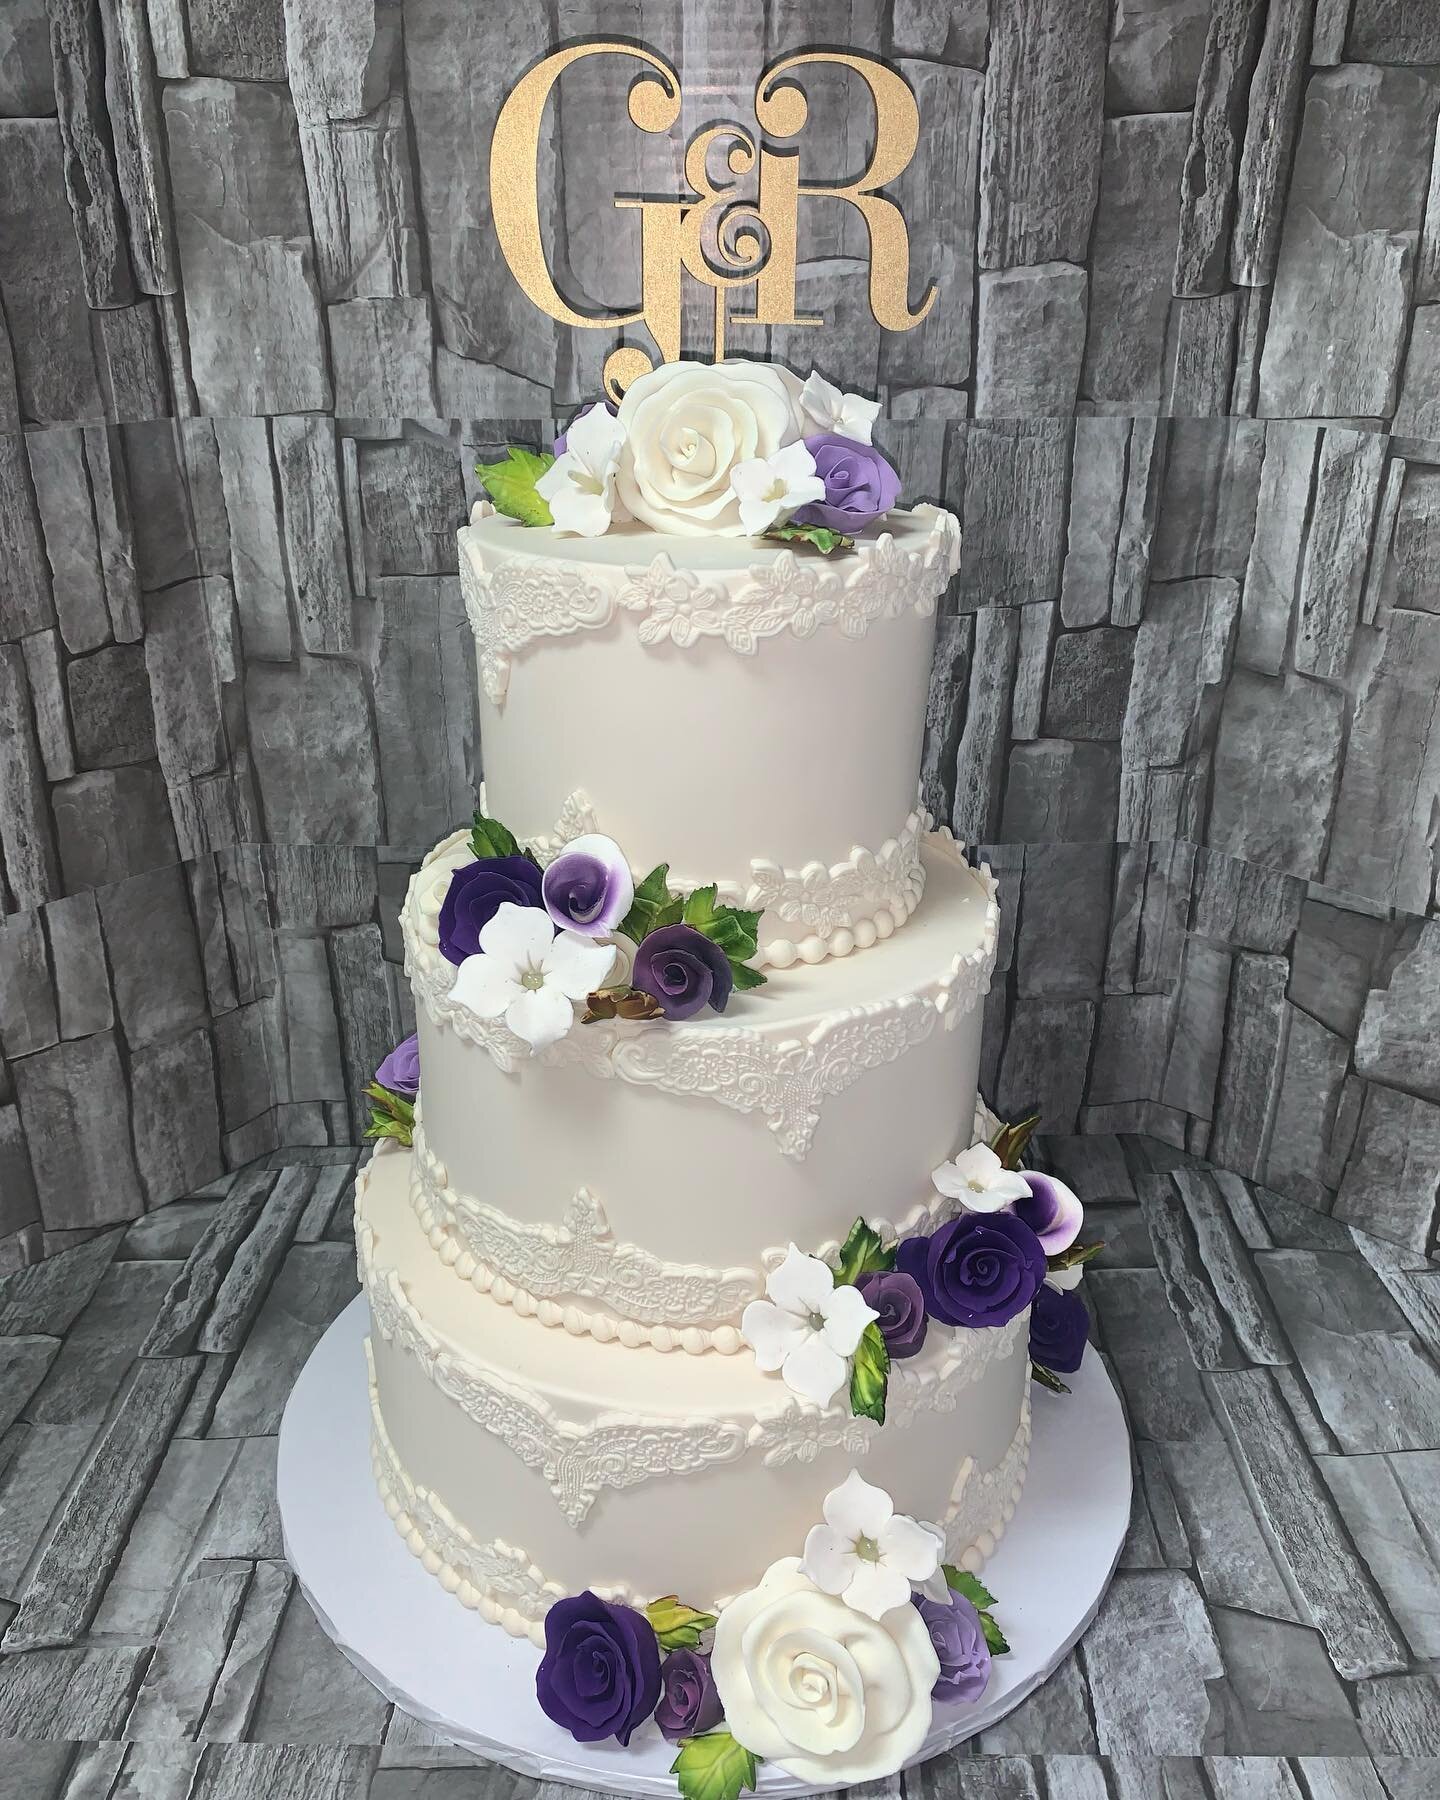 Spring is in the air and so is wedding season! This wedding cake is blooming with love! 💐💍